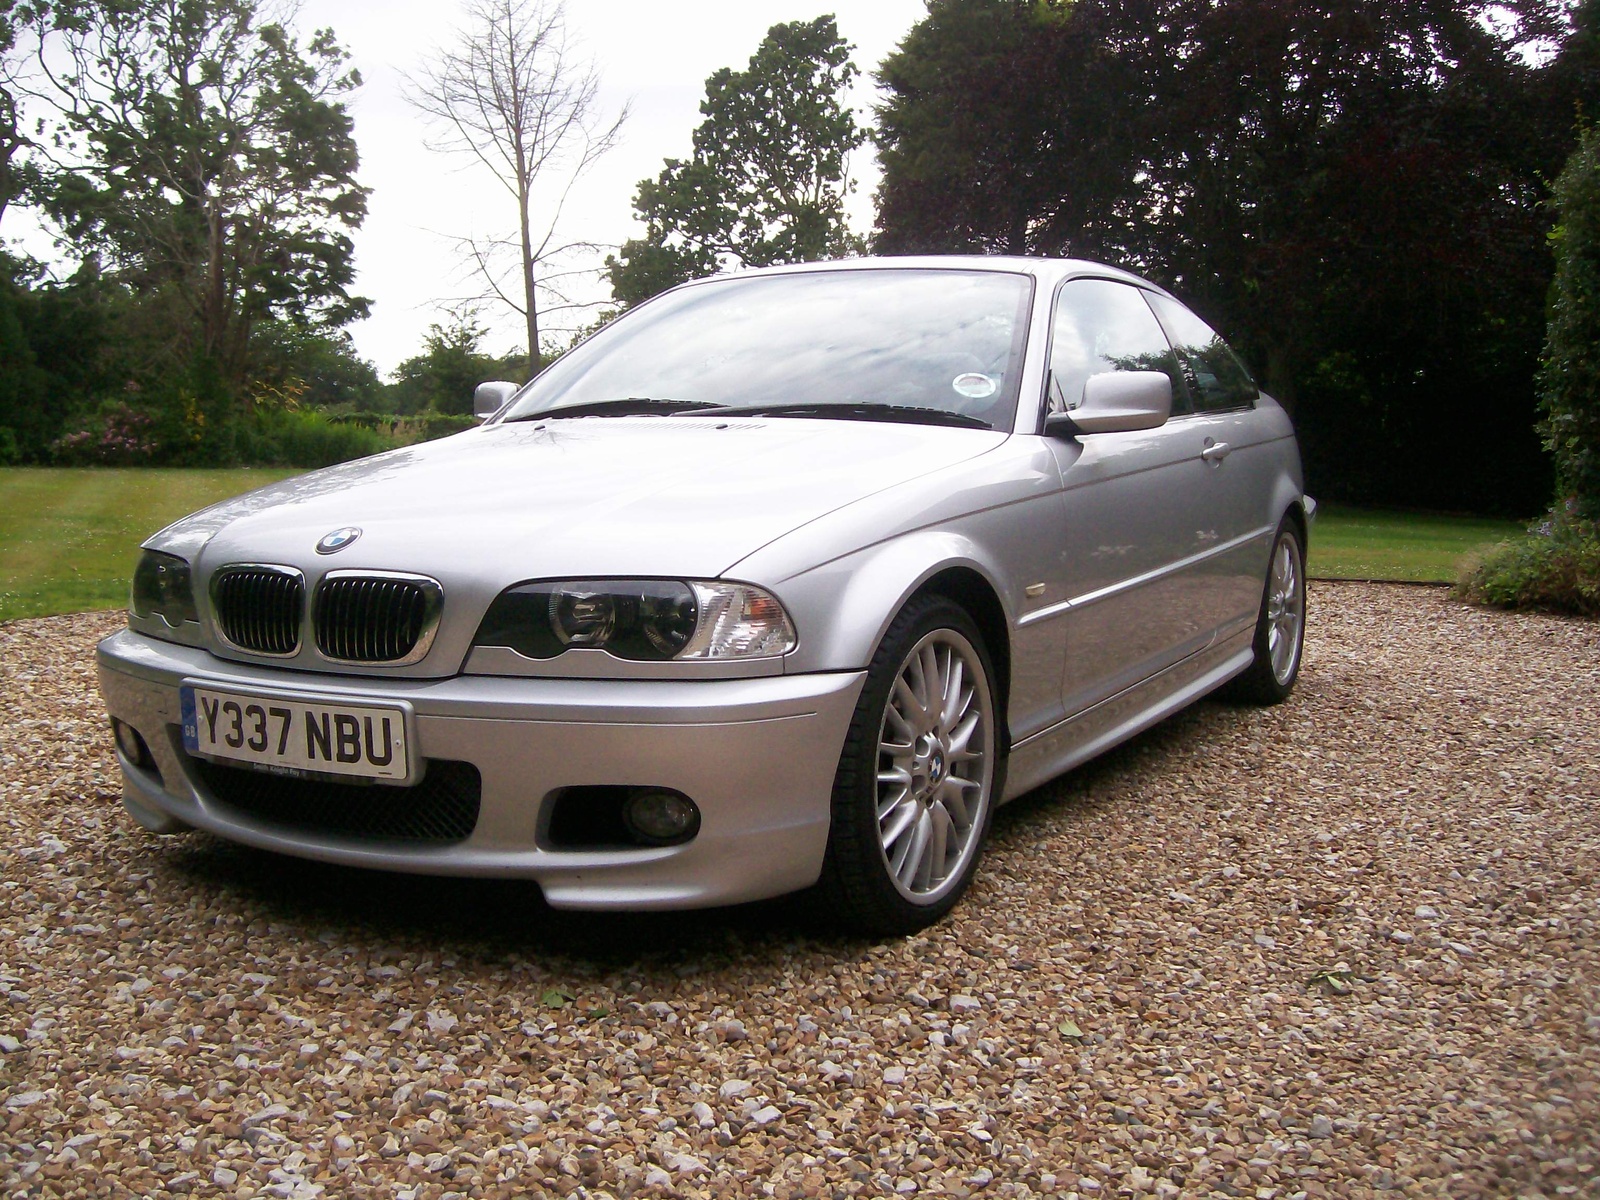 2001 Bmw 3 series 325ci coupe review #3